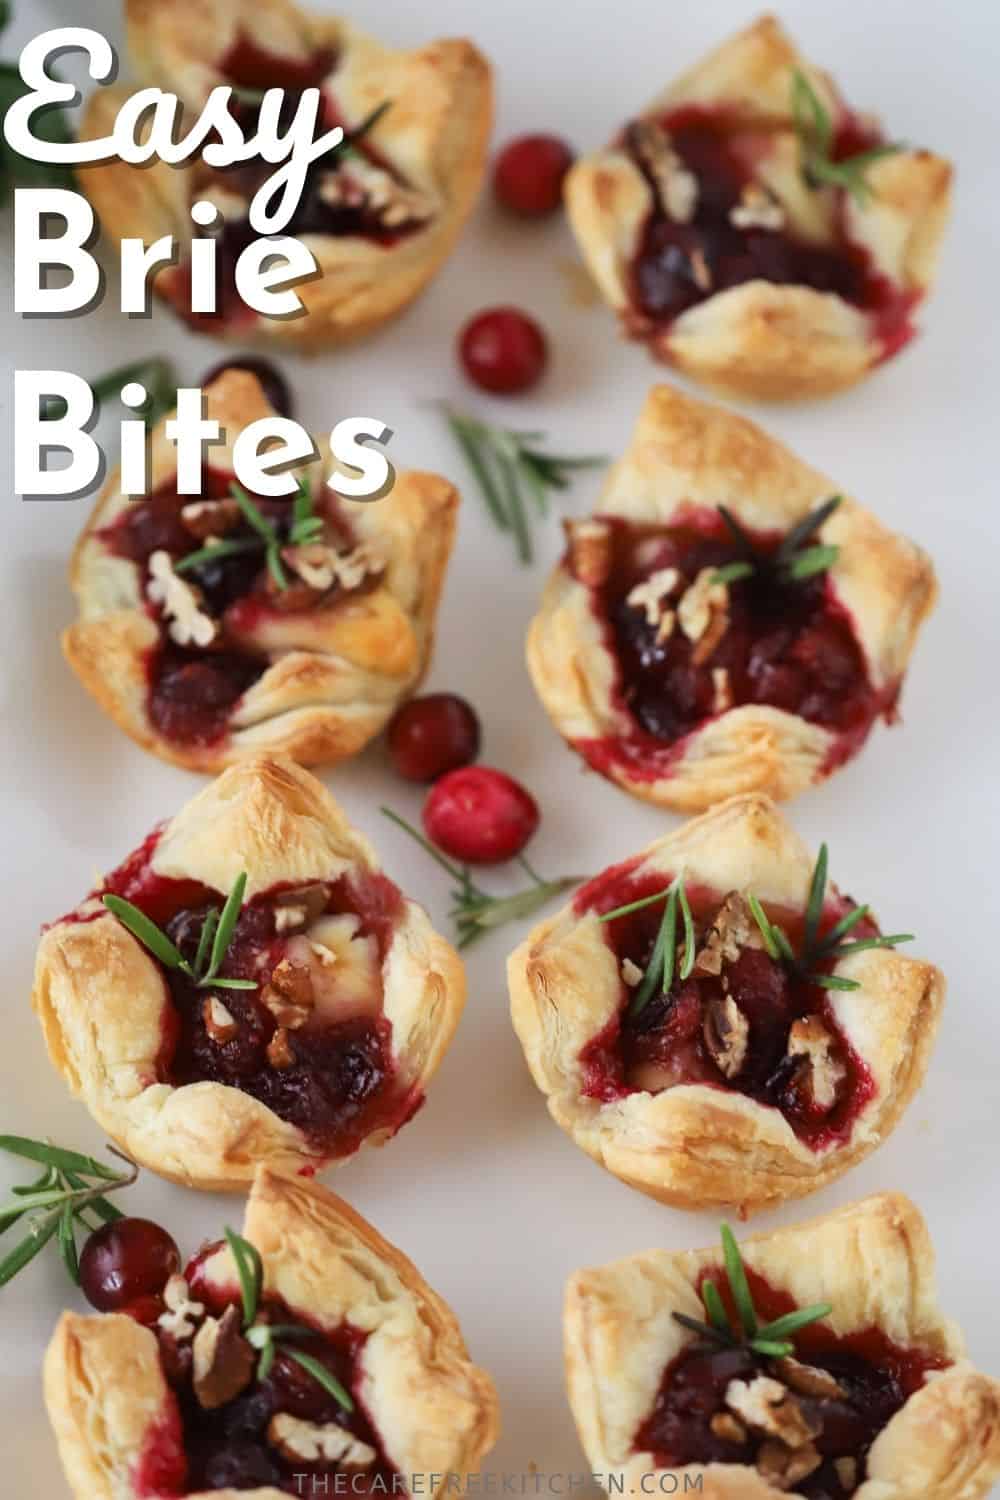 Cranberry Baked Brie Bites - The Carefree Kitchen